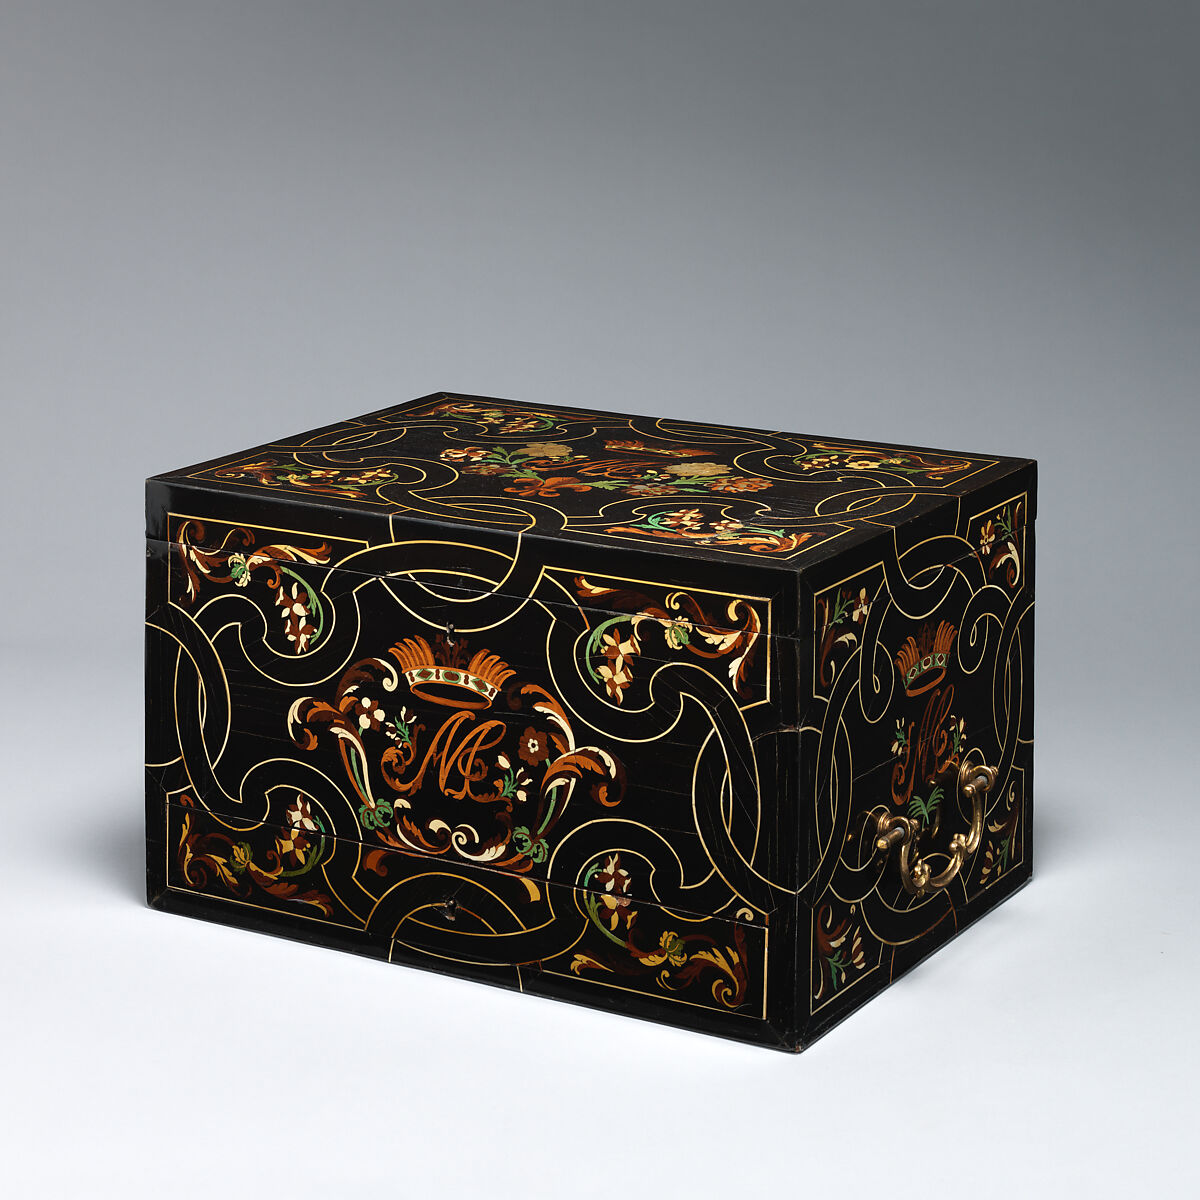 Coffer with inlaid monogram, Ebony, various marquetry woods, ivory, stained horn, mother-of-pearl, on poplar wood, mahogany; modern velvet; brass hardware; gilt-bronze handles, Possibly French or Italian 